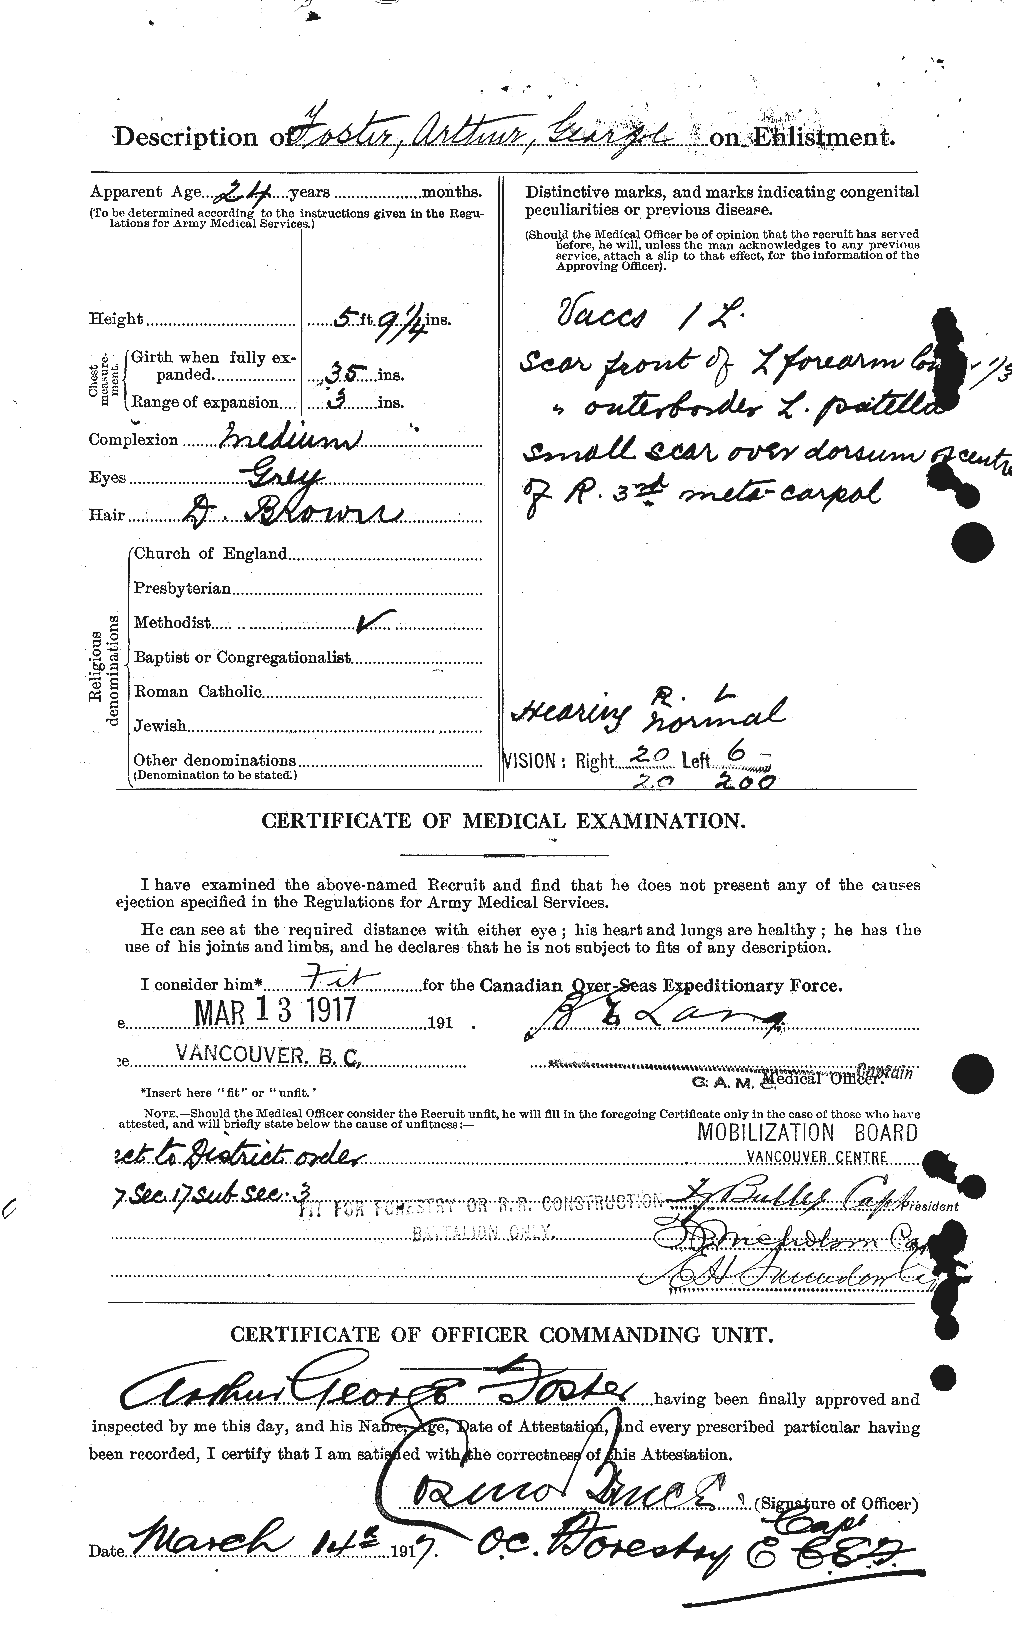 Personnel Records of the First World War - CEF 330472b